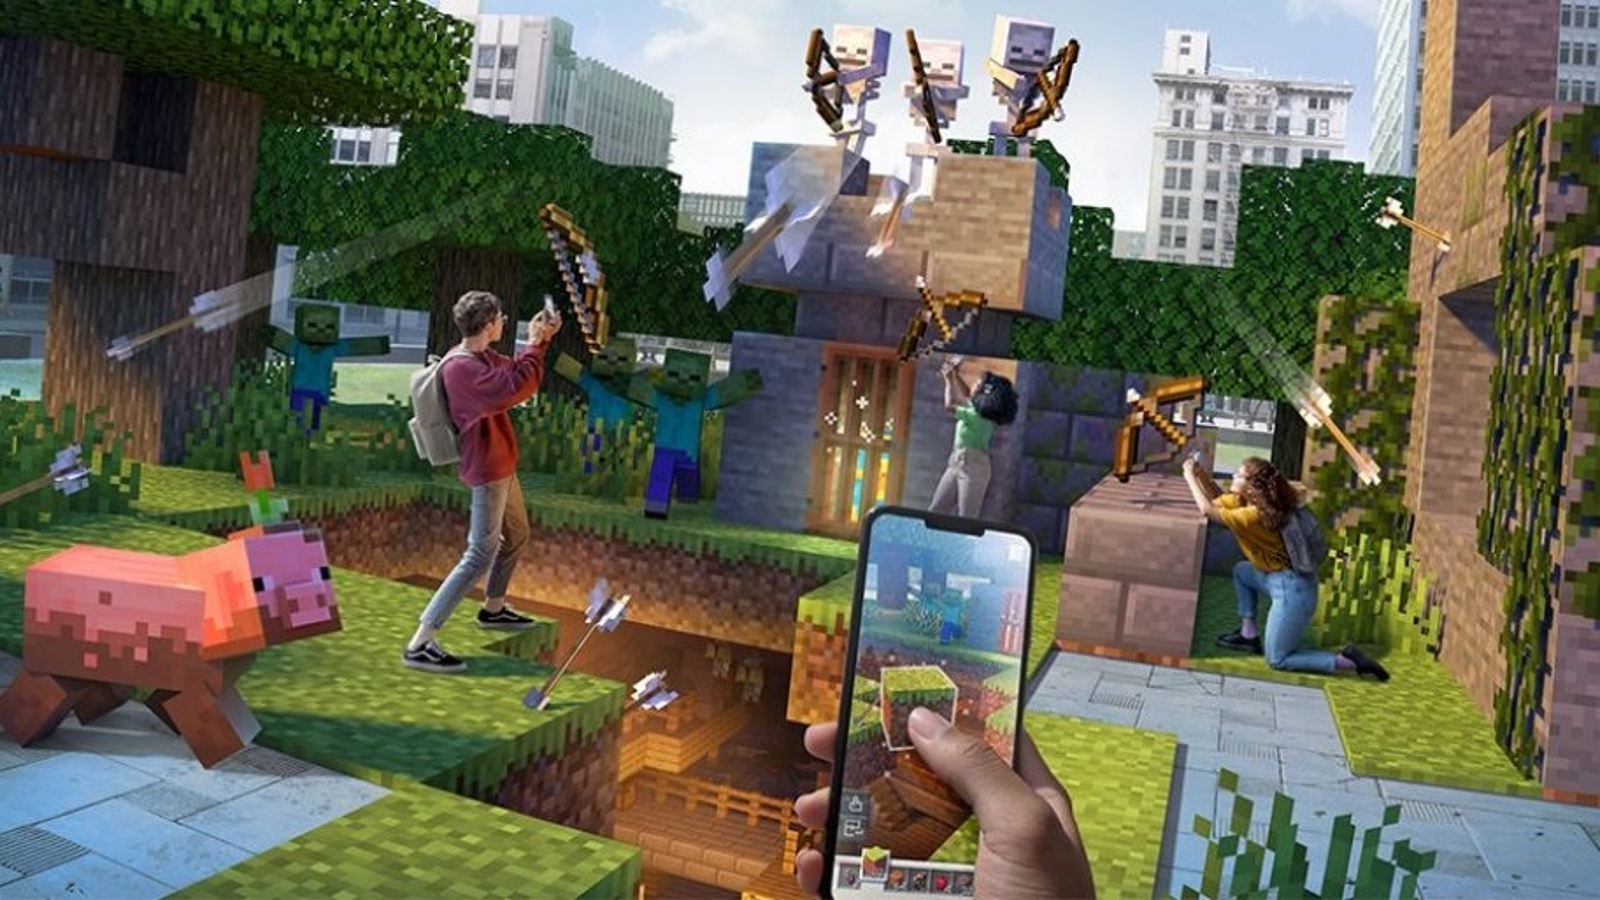 Can't download Minecraft Earth in play store. - Google Play Community